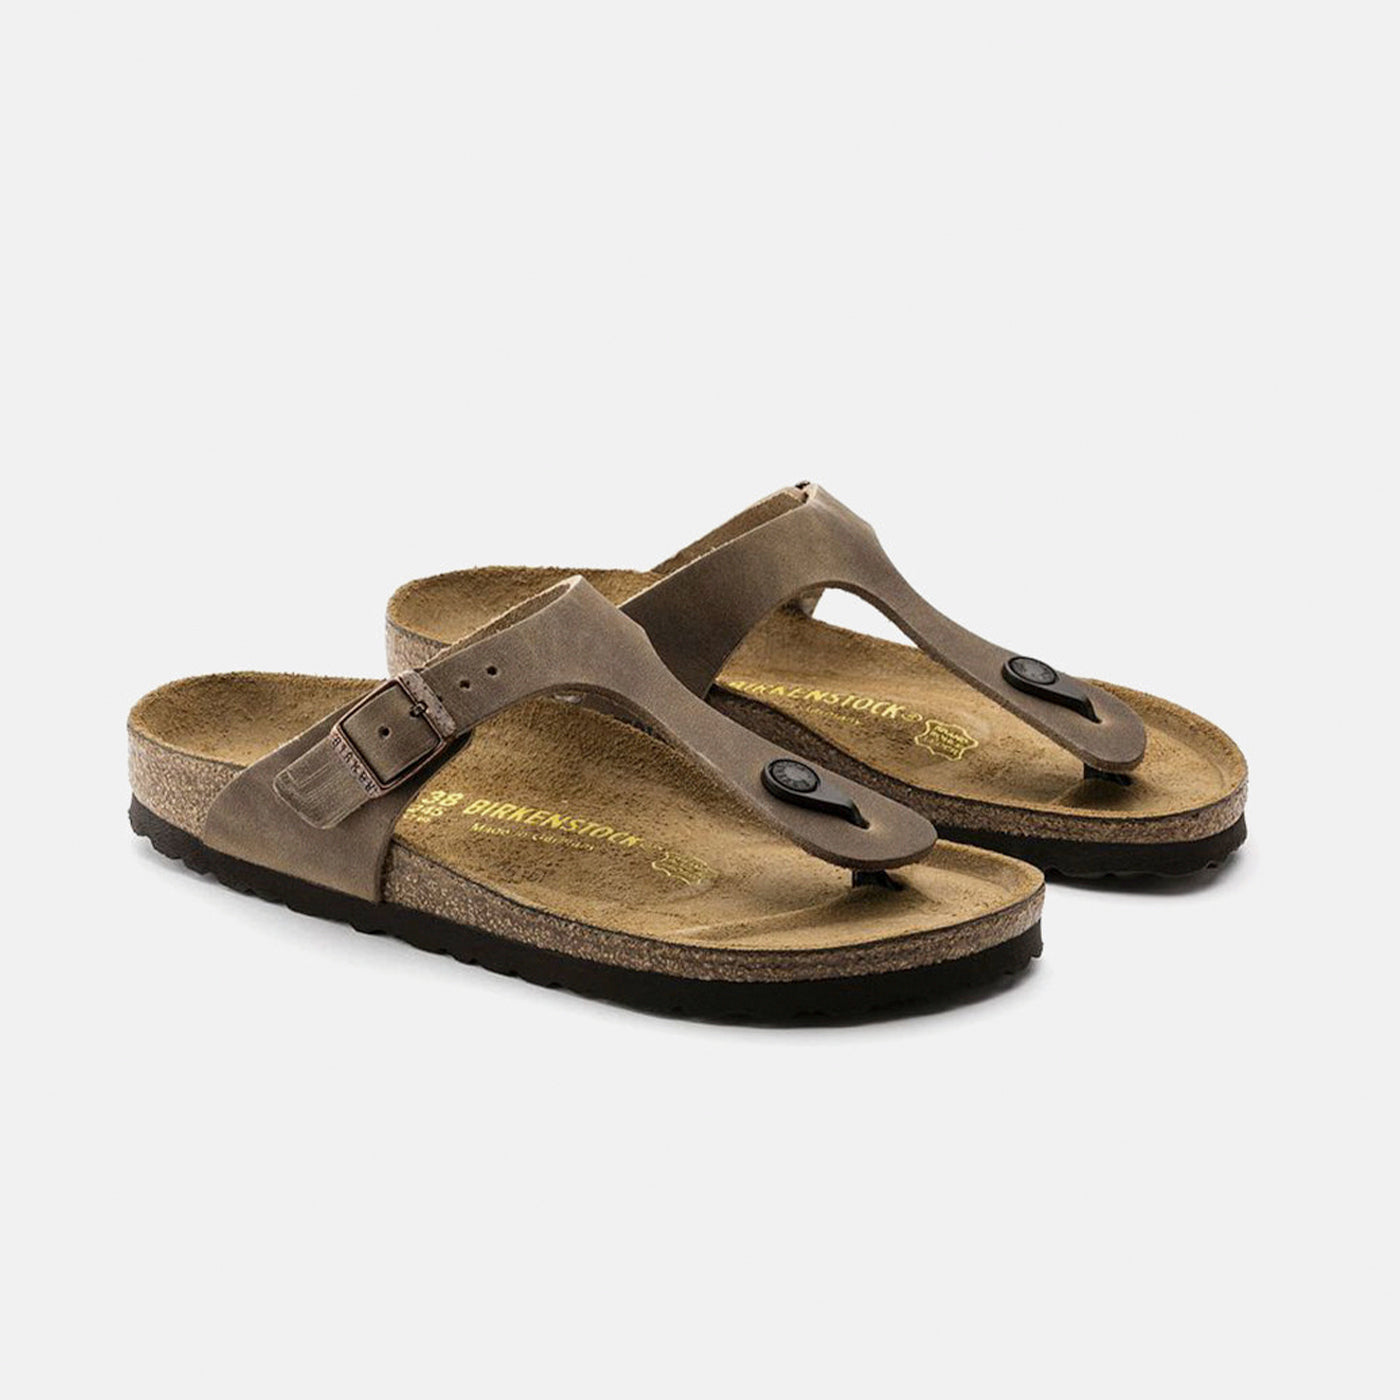 Load image into Gallery viewer, Birkenstock - Gizeh - Oiled Leather - Tabacco Brown - Regular
